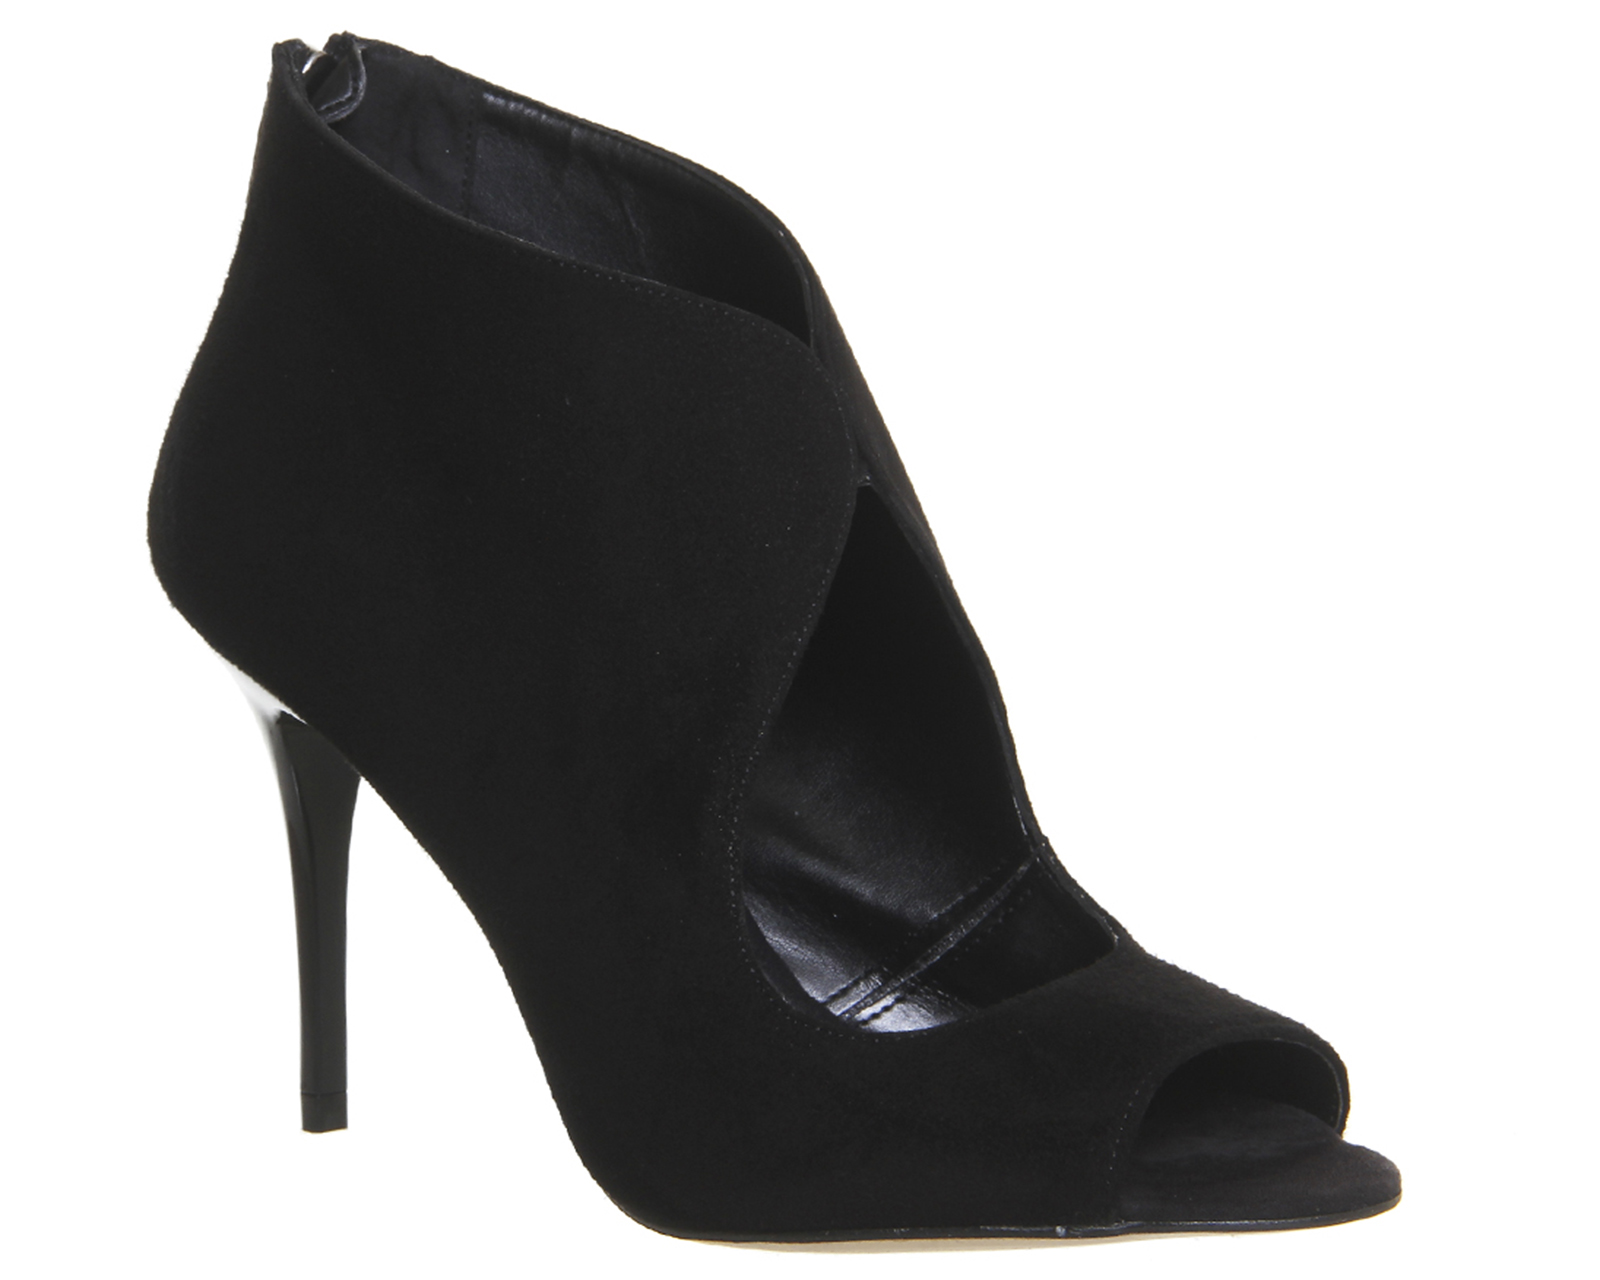 OFFICEQuids In Cut Out Zip Back Shoe BootsBlack Suede